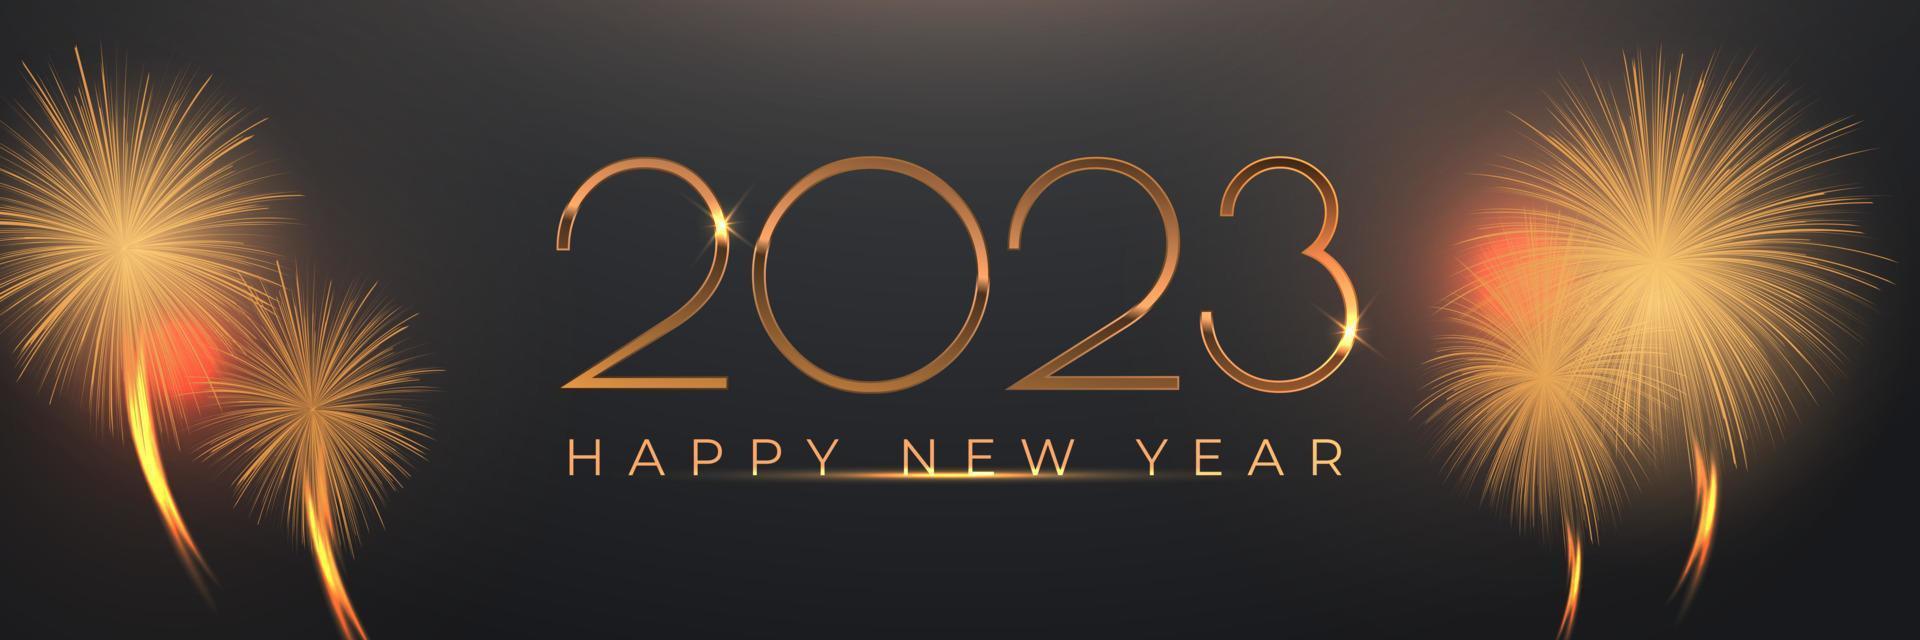 2022 New Year Abstract background with fireworks vector illustration